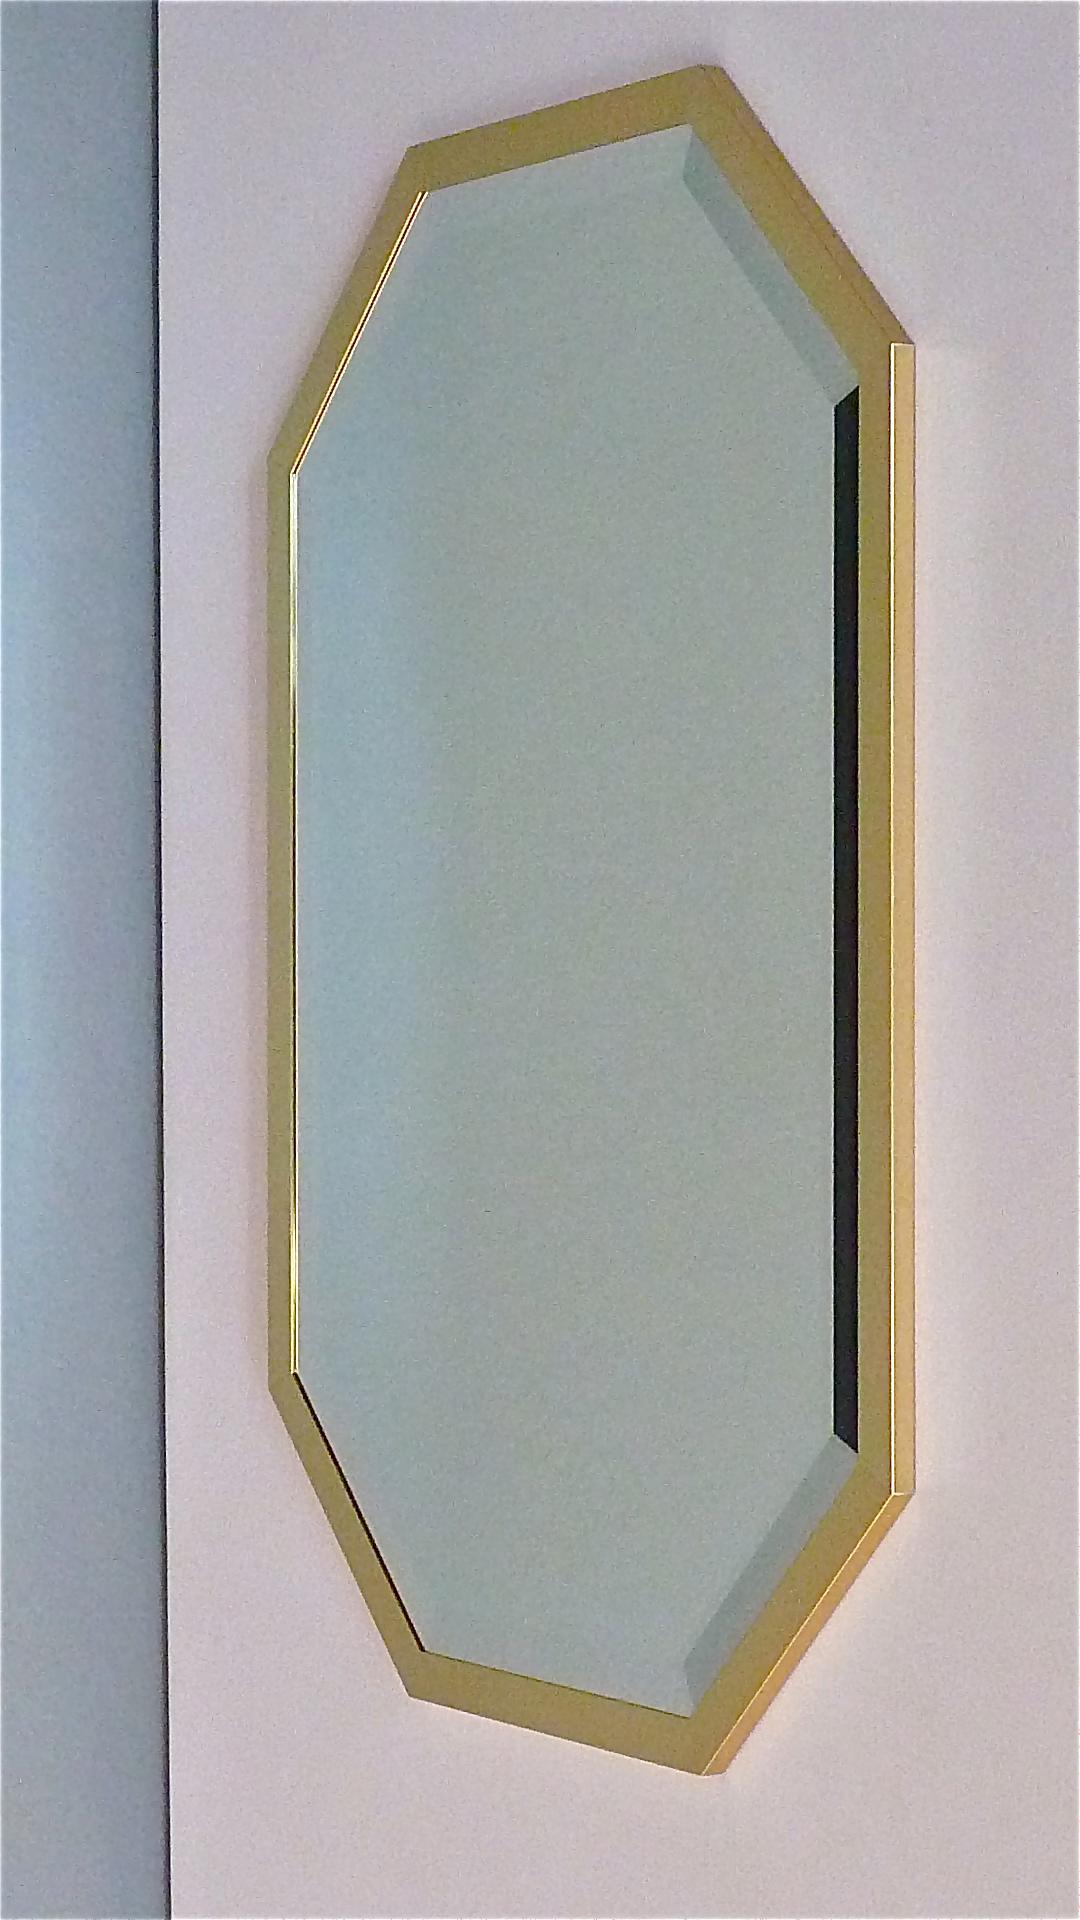 Late 20th Century Large Maison Jansen Style Mirror Octagonal Gilt Brass Faceted Glass Crespi Rizzo For Sale